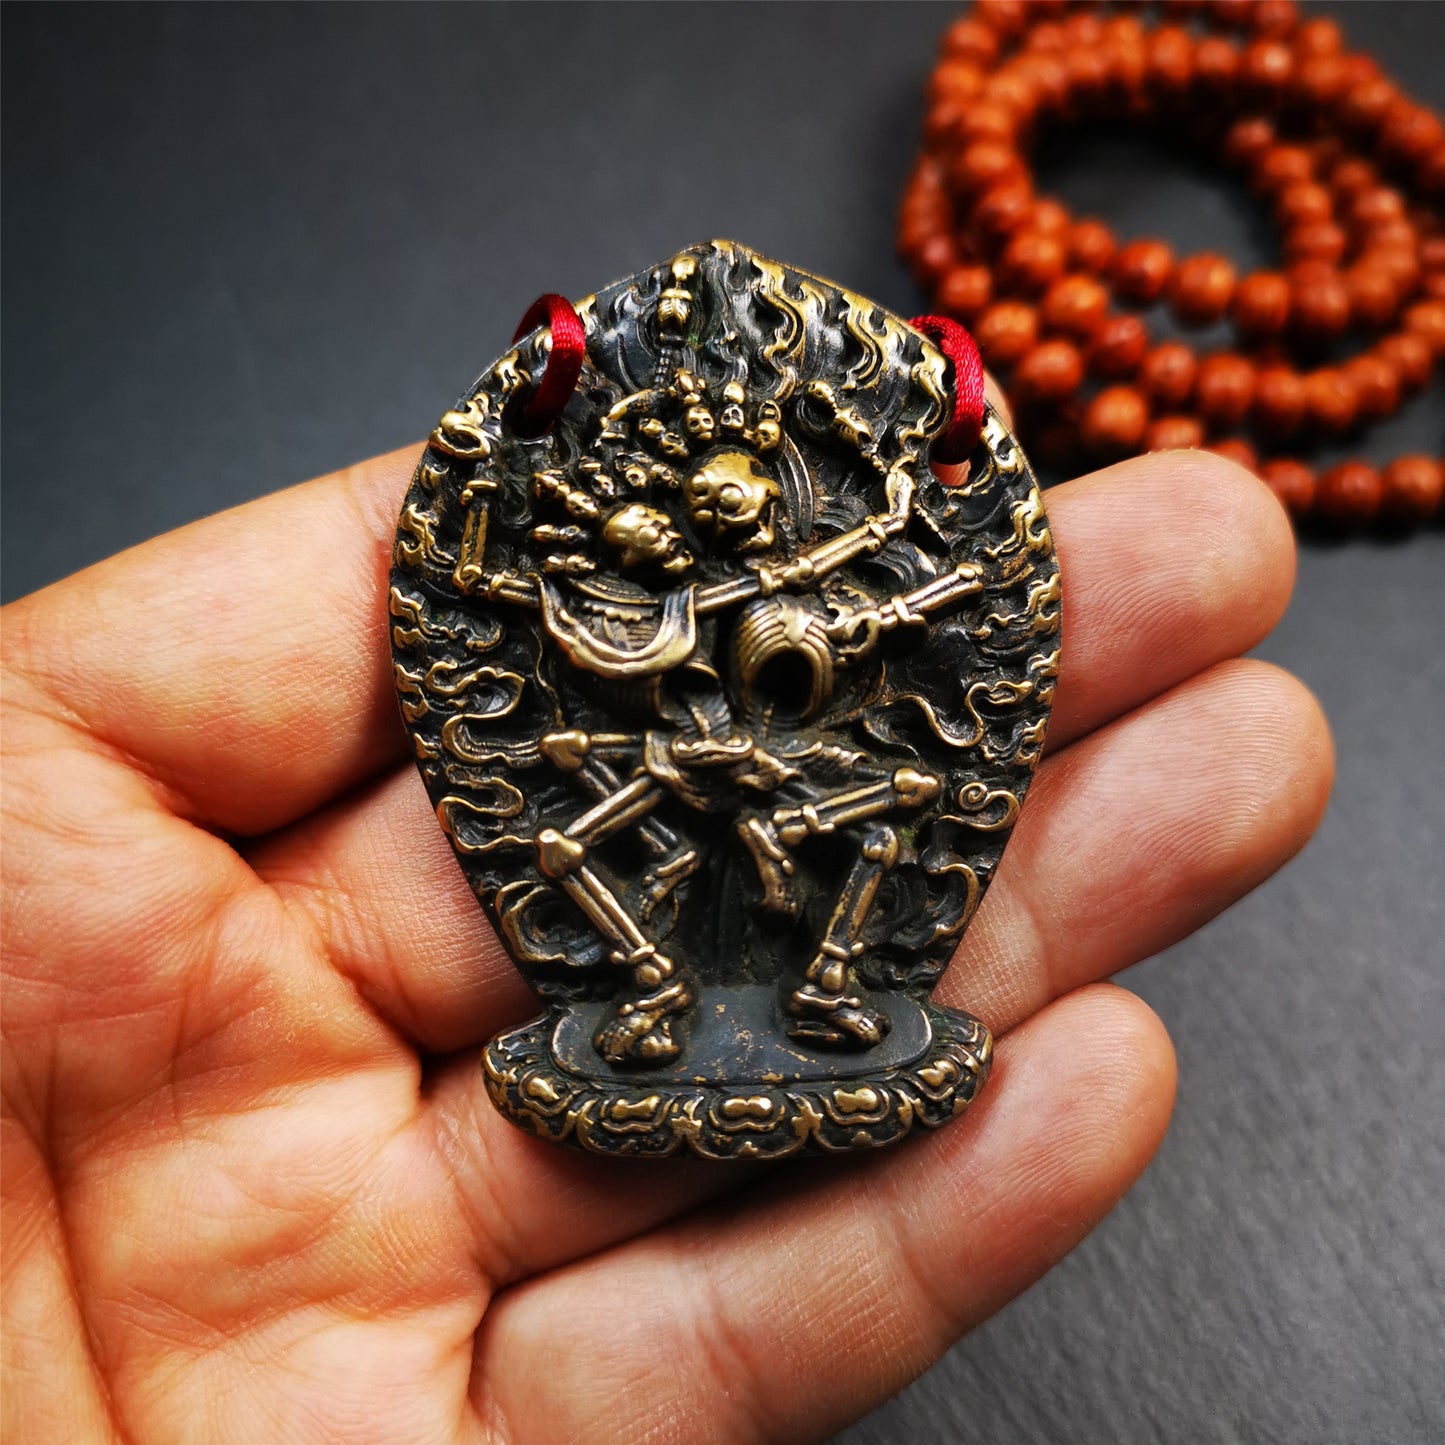 This beautiful Skull Masters of Sitavana statue was collected from Gerze Tibet. It is Masters of Sitavana,the corpse forest owner and his wife stand hugging and standing on the seat cushion. It's made of brass,yellow color,size is 2.1 × 1.8 inches.